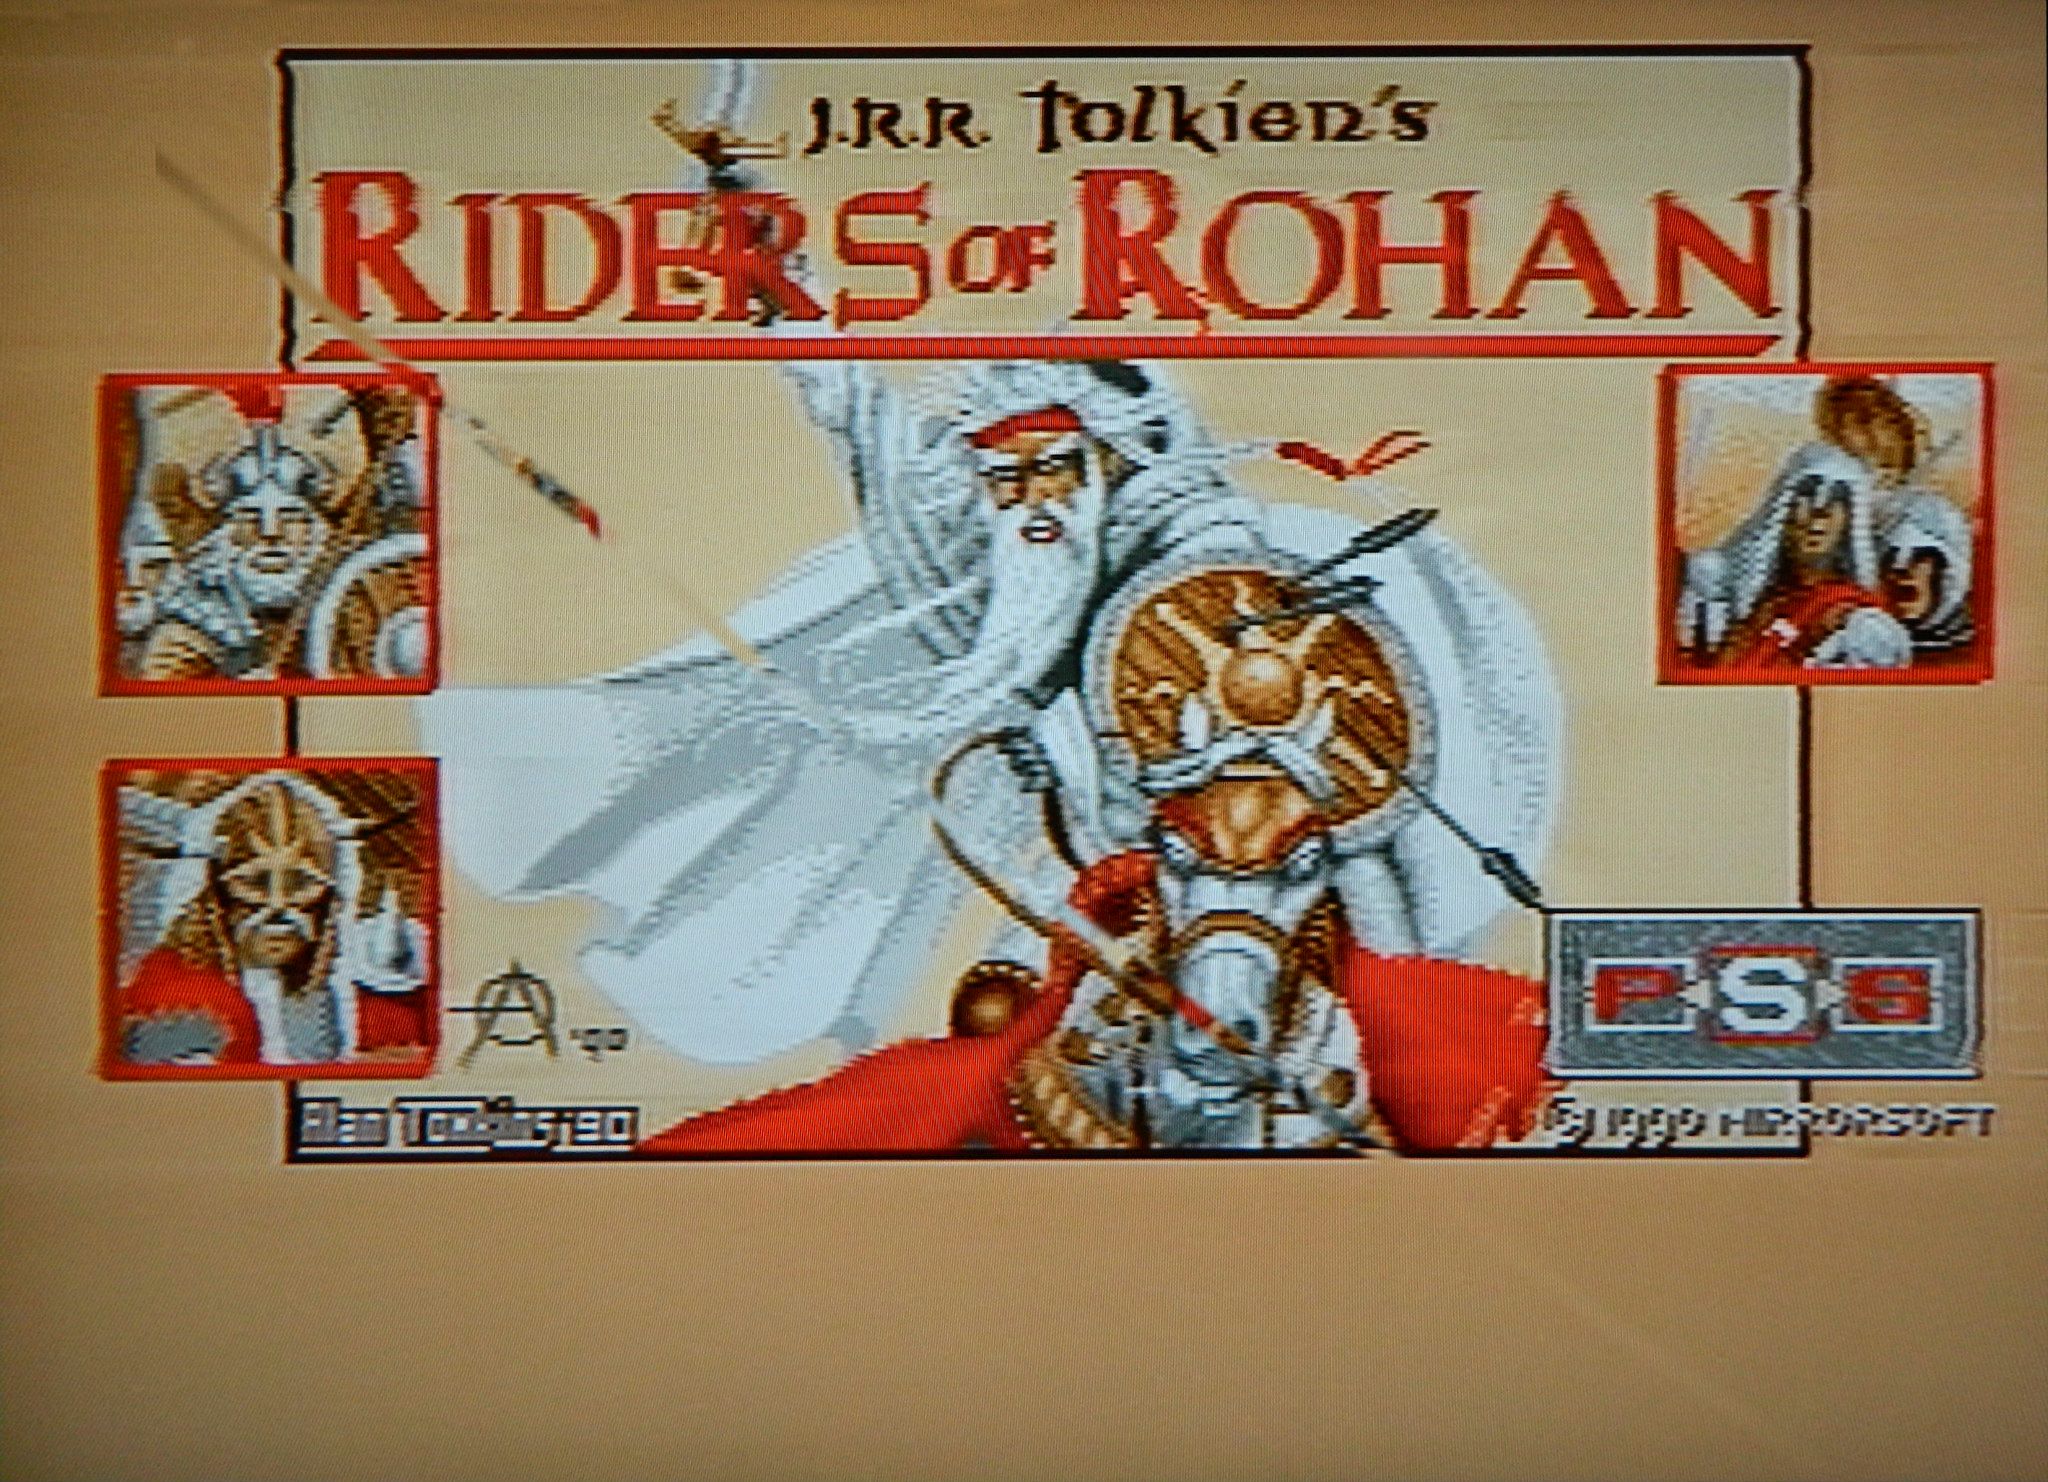 Riders of Rohan was one of the first VGA games Alan did.